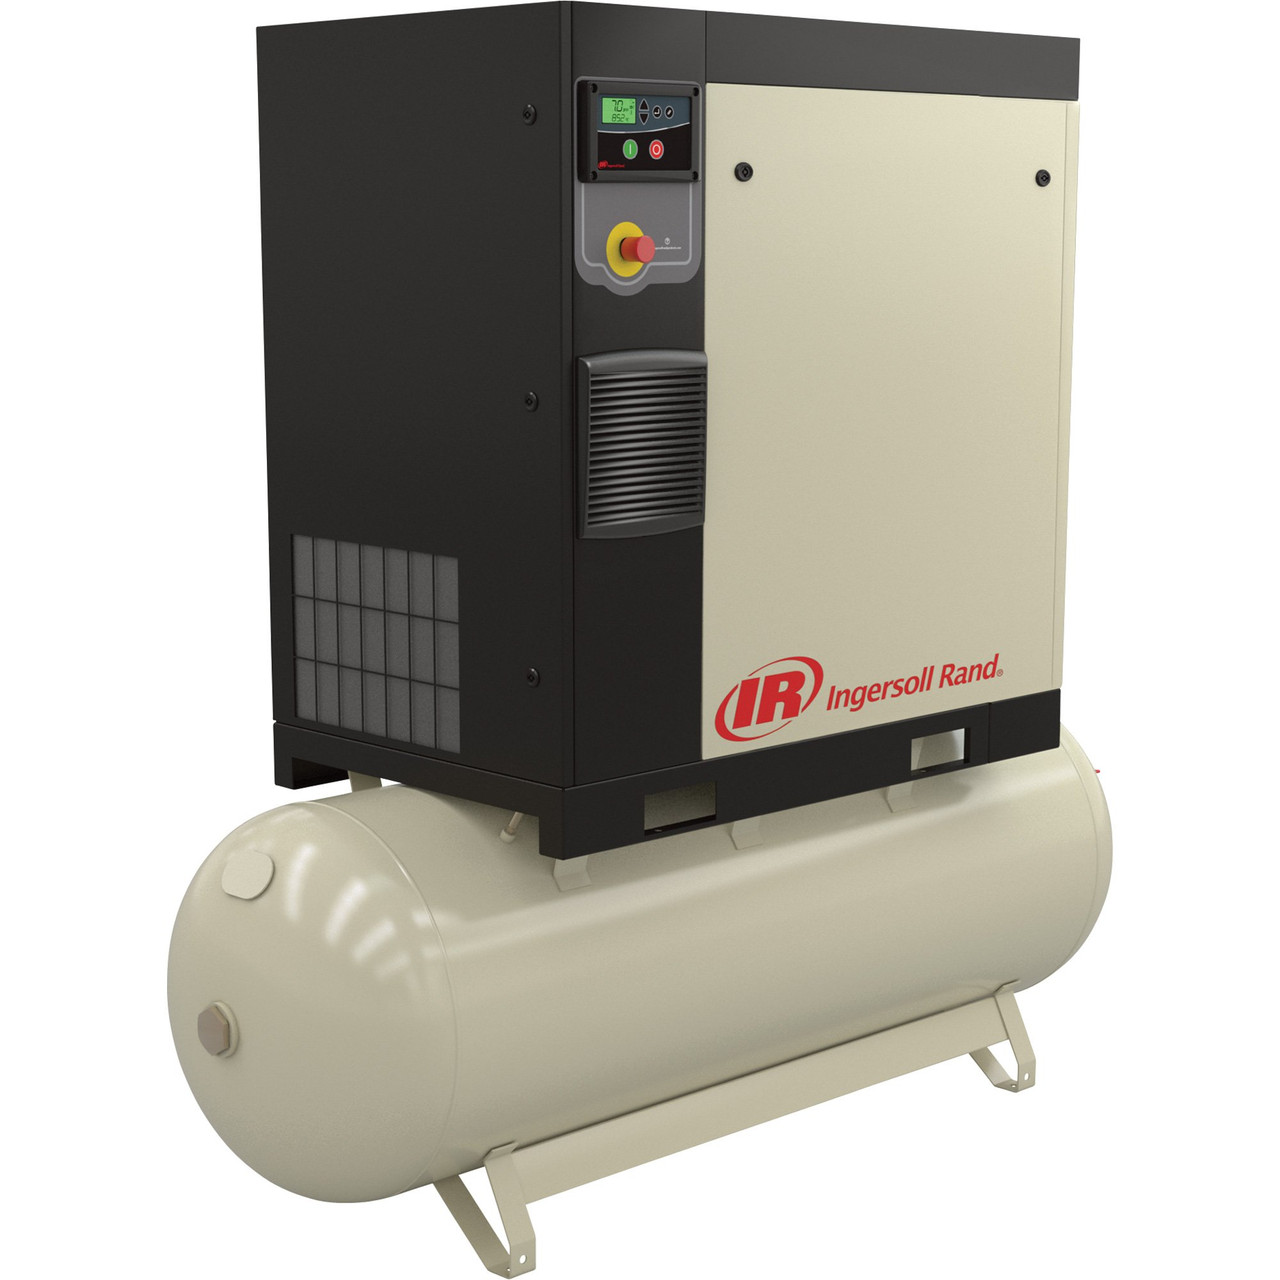 Ingersoll Rand R Series 10  HP Screw Compressor+ Total Air System